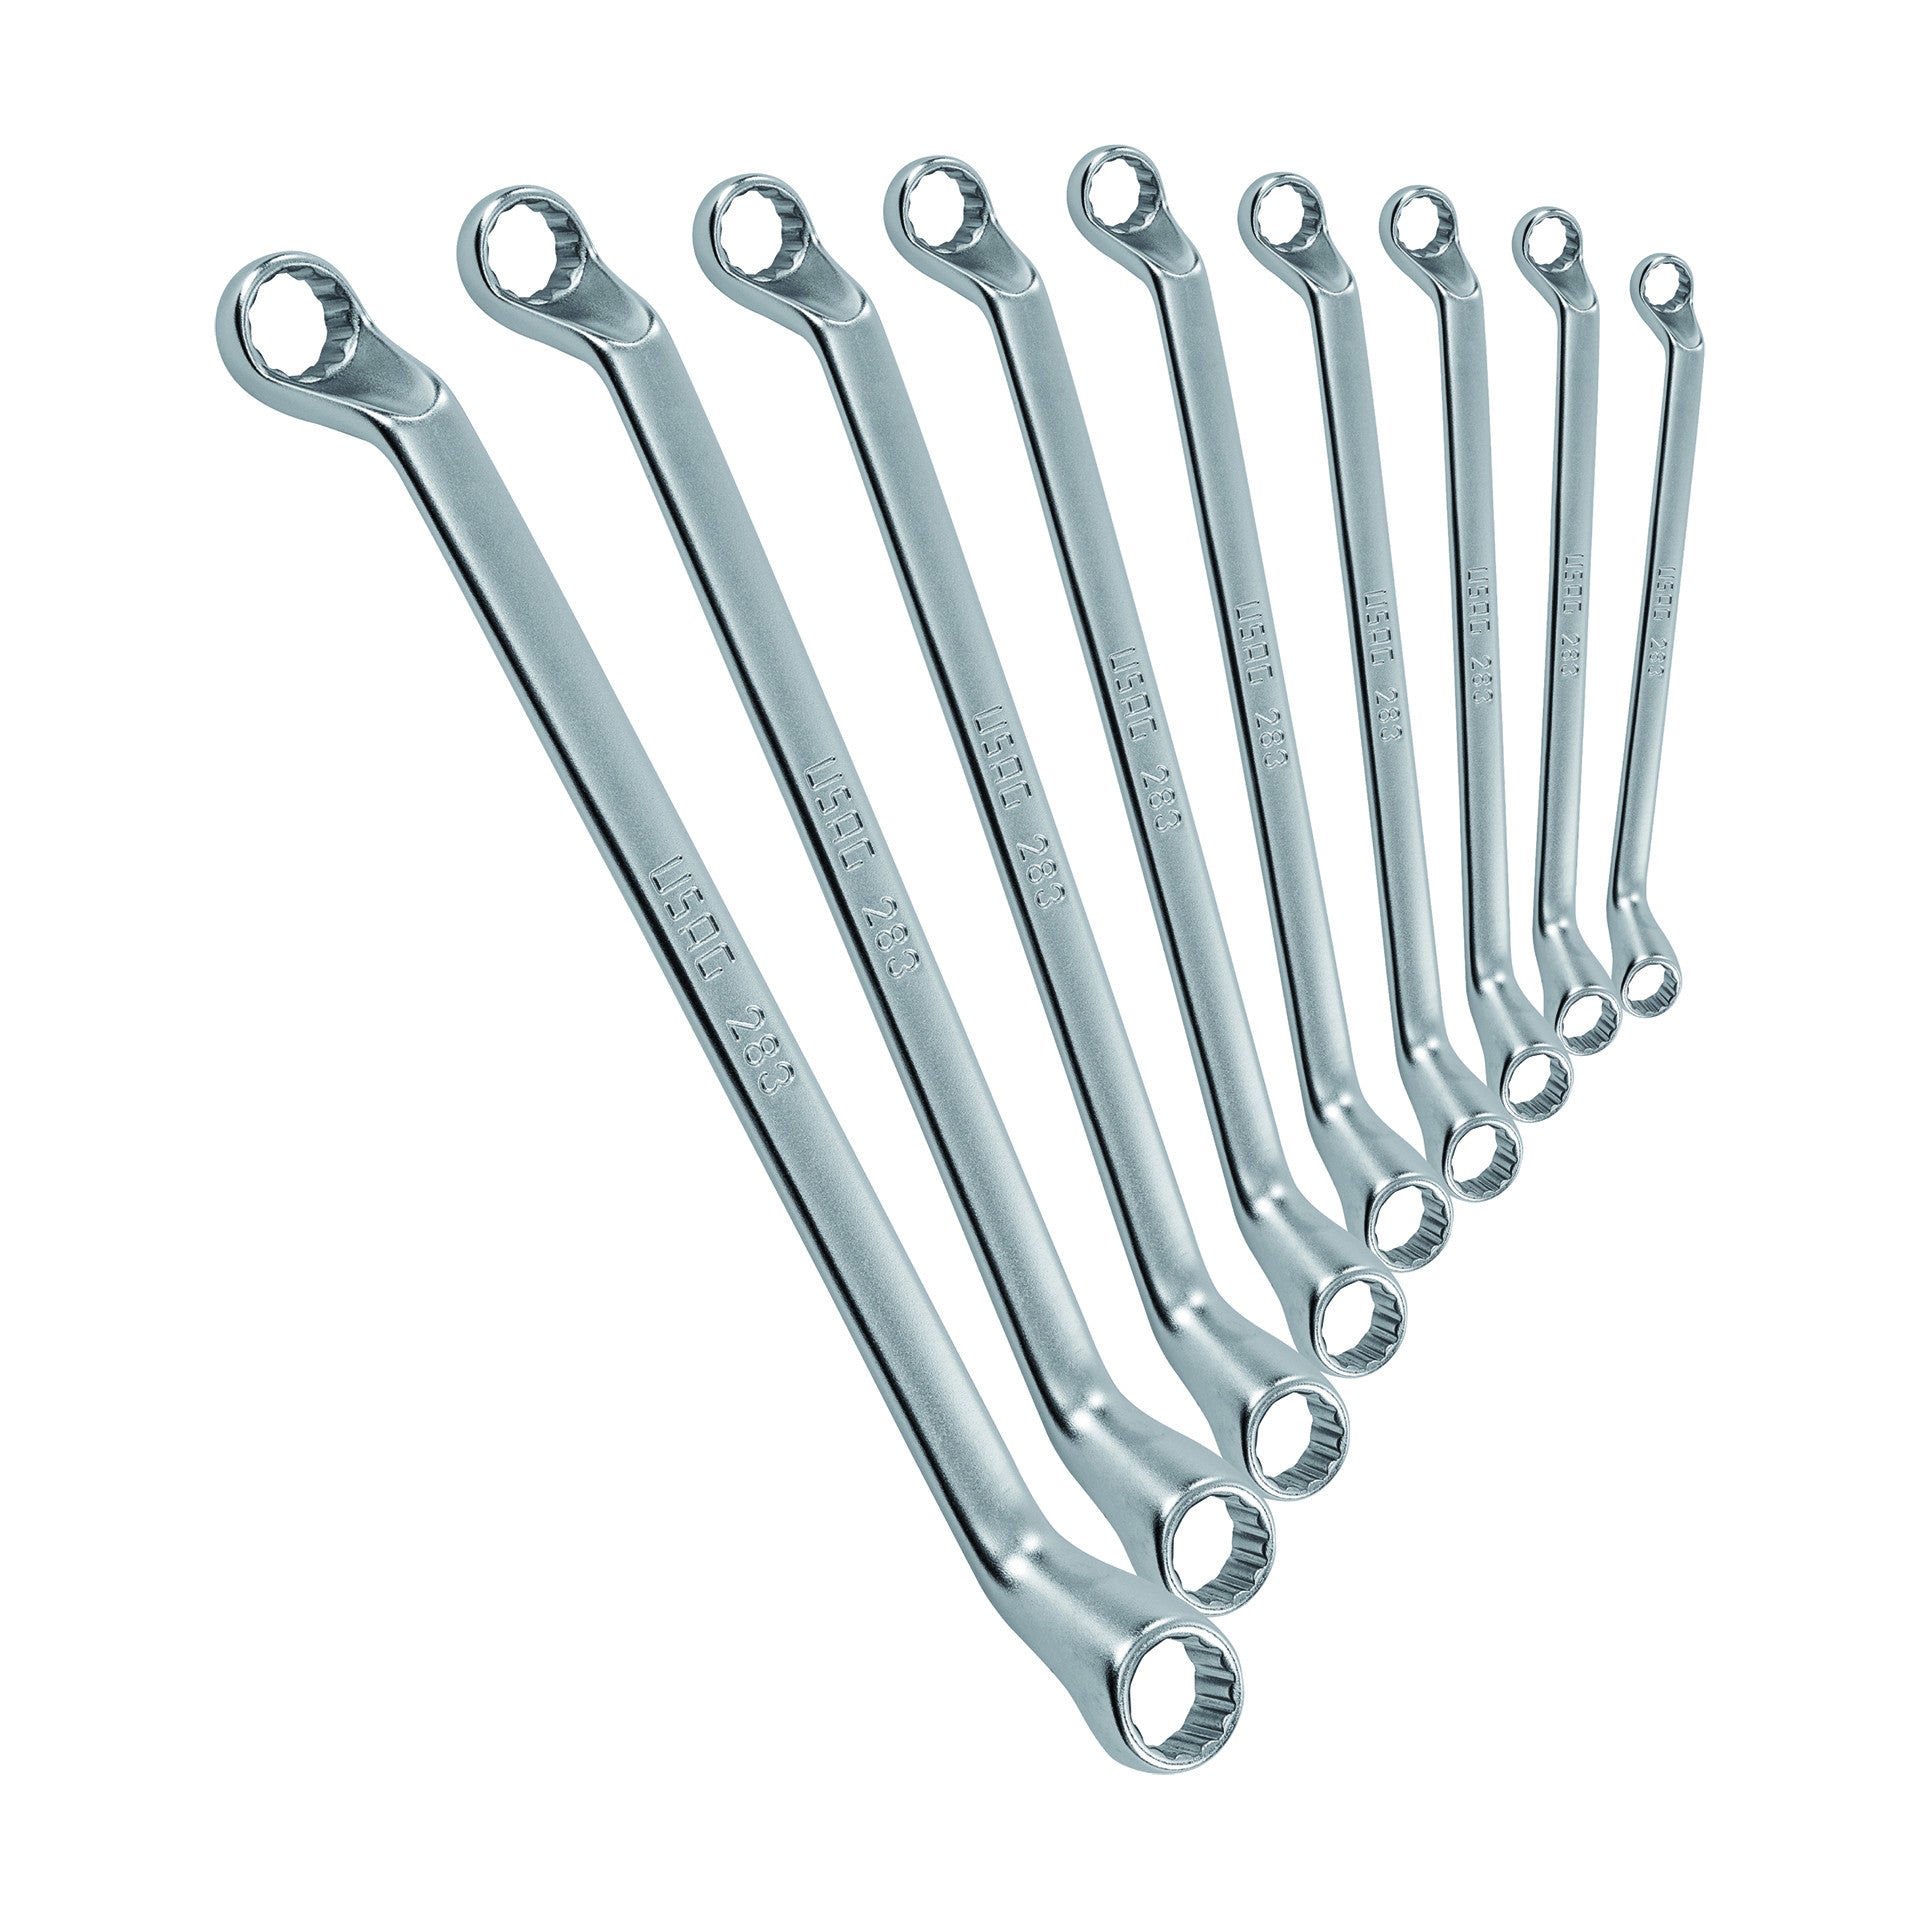 Set of 9 SE9 curved double polygon wrenches - Usag U02831405